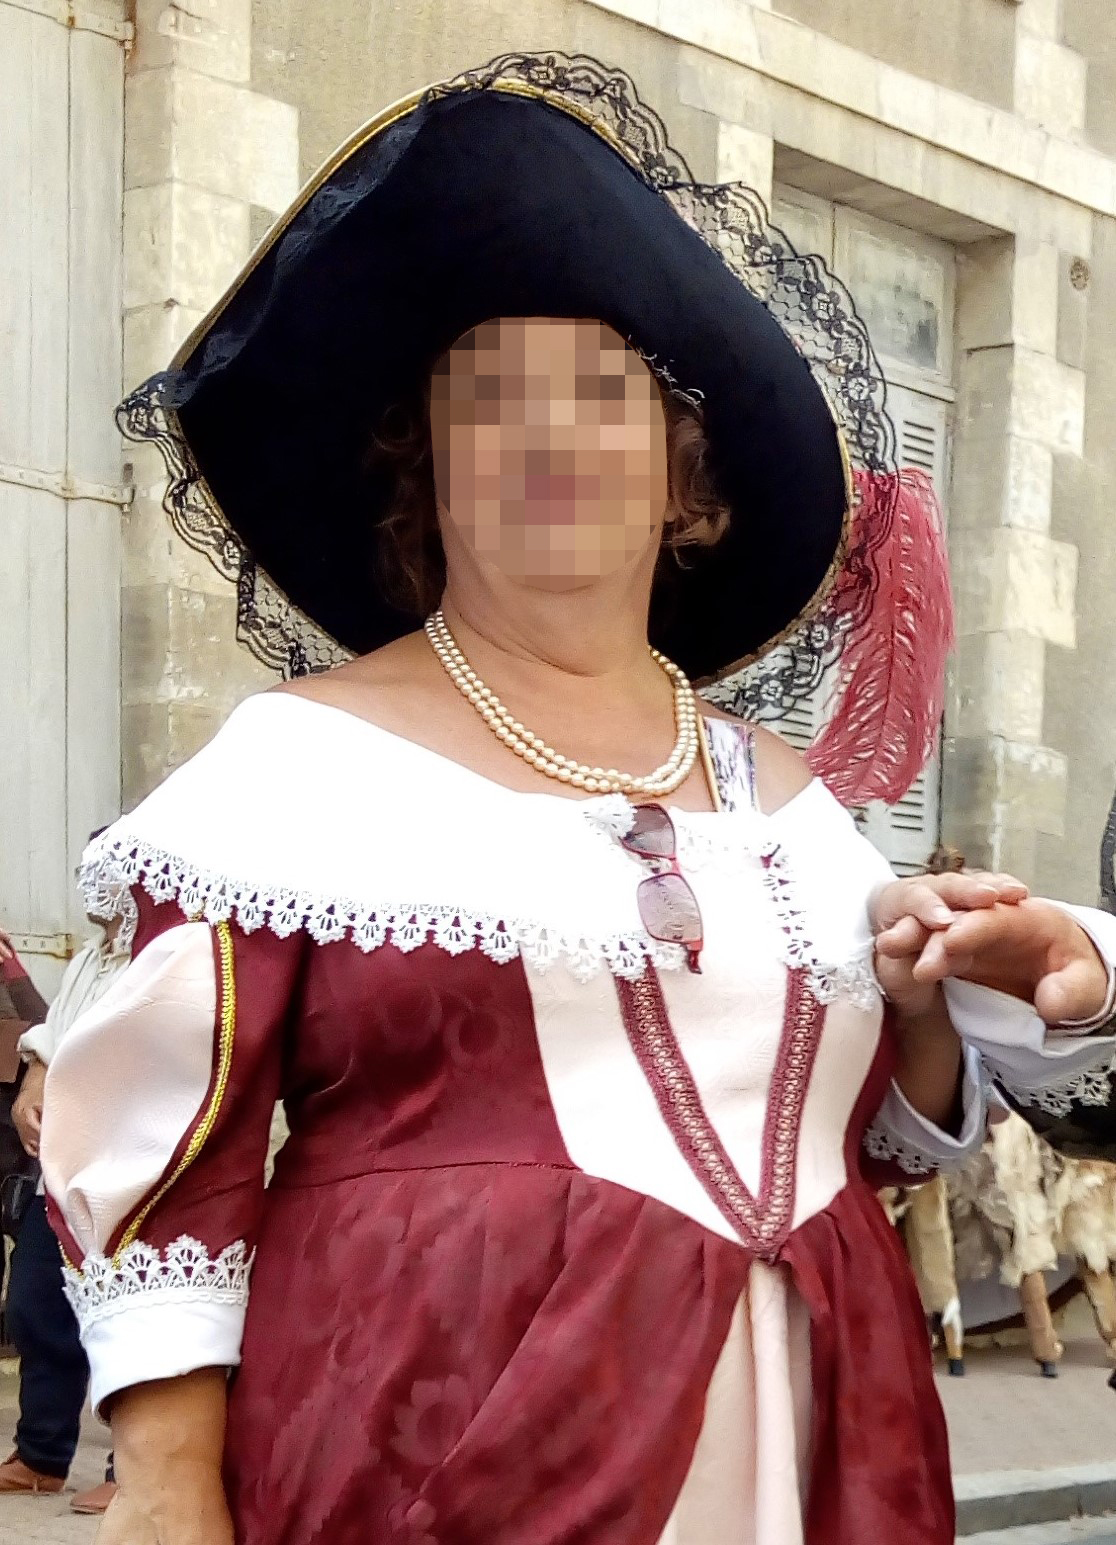 Detail of the Lady of Bourbon street’s costume